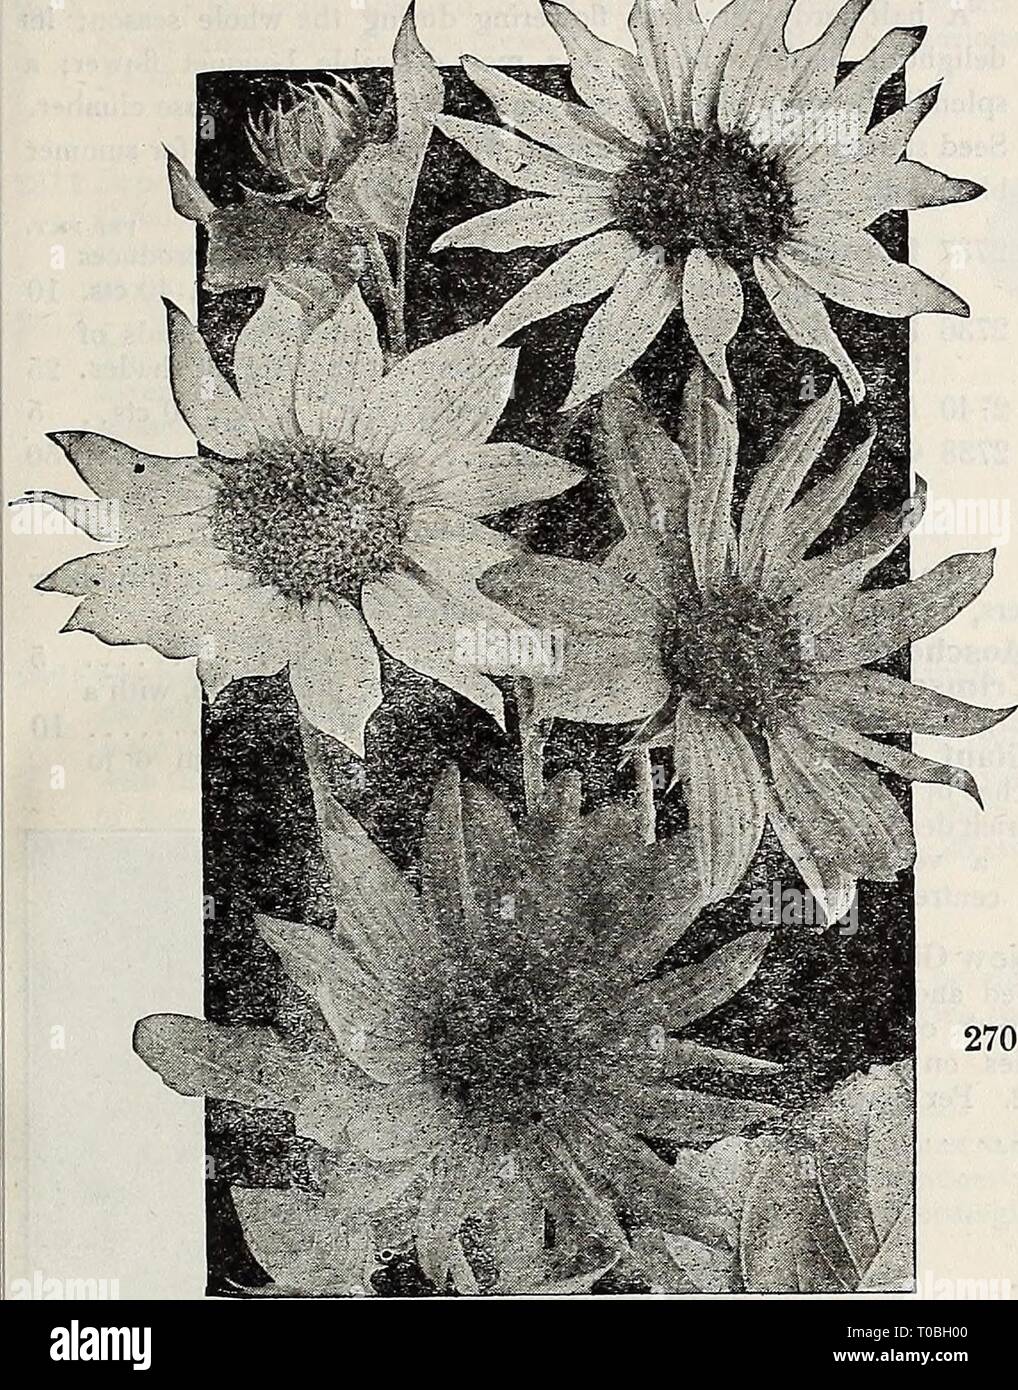 Dreer's garden book 1917 (1917) Dreer's garden book 1917 dreersgardenbook1917henr Year: 1917  ENRYADREER -WIILADELPHIAjA;Mf RELIABLE f LOWER SEEDS 91 M k/f „    HEUANTHUS (Sunflower). Remarkable for the stately growth, size and brilliancy of their flowers, making a Very good effect among shrubbery and for screens. SINGLE ANNUAL SUNFLOWERS. The single Sunflowers are indispensable for cutting. Sown on a sunny spot in April or May they come into bloom early in summer, and keep up a constant supply of flowers until cut down by frost. PER PKT. 2701 Cucumerifolius (Miniature Sunflower}. Small, singl Stock Photo